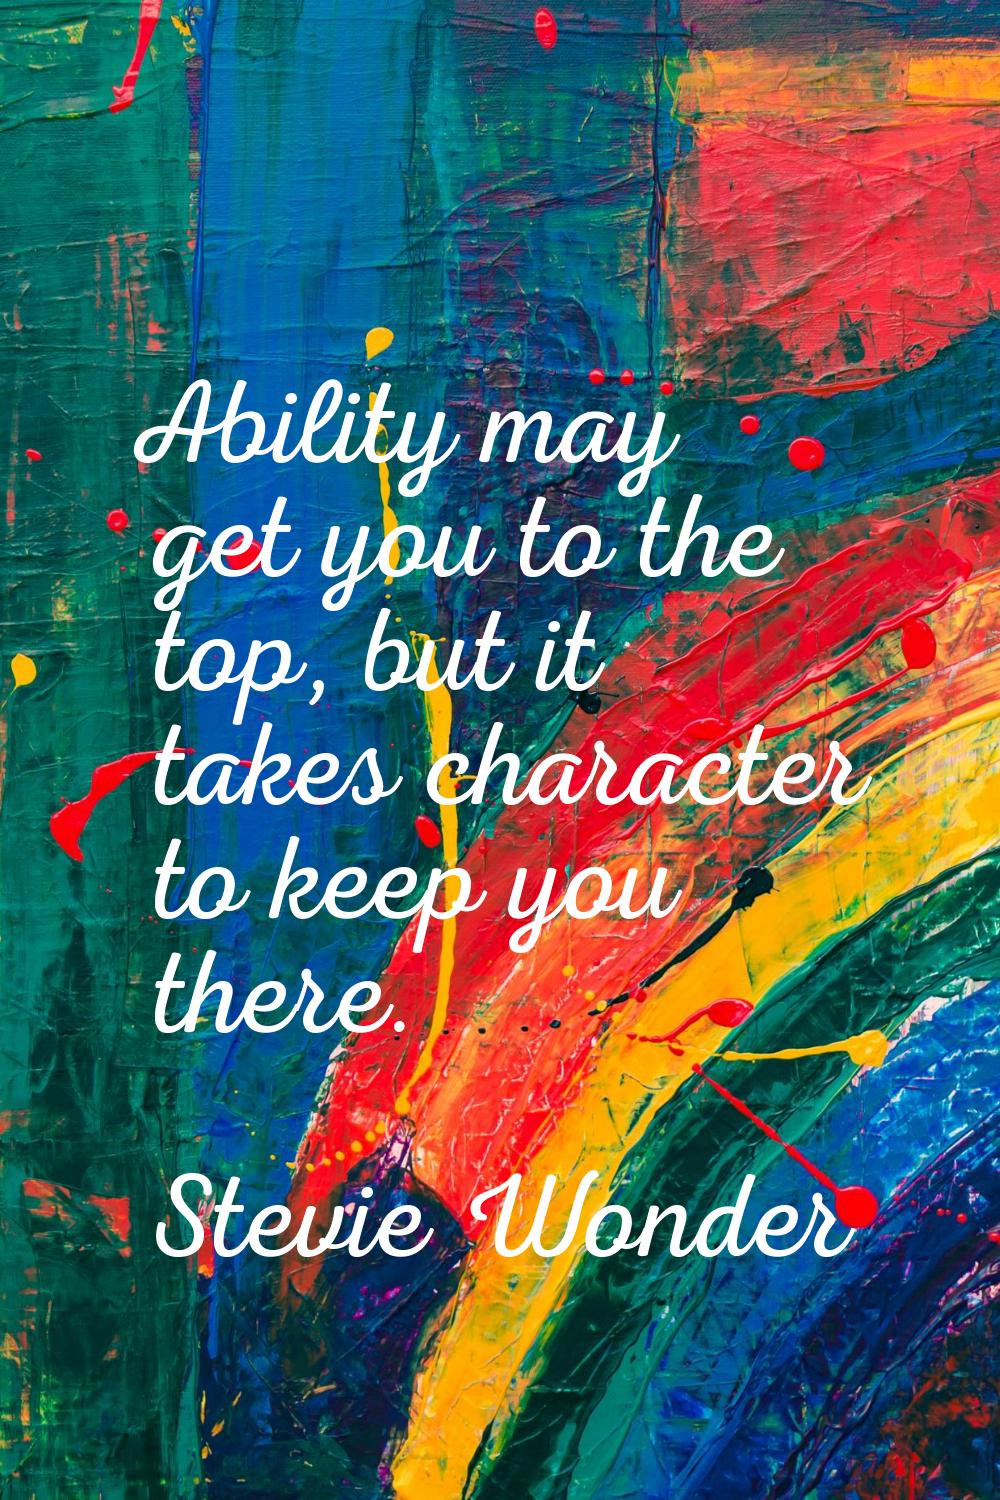 Ability may get you to the top, but it takes character to keep you there.